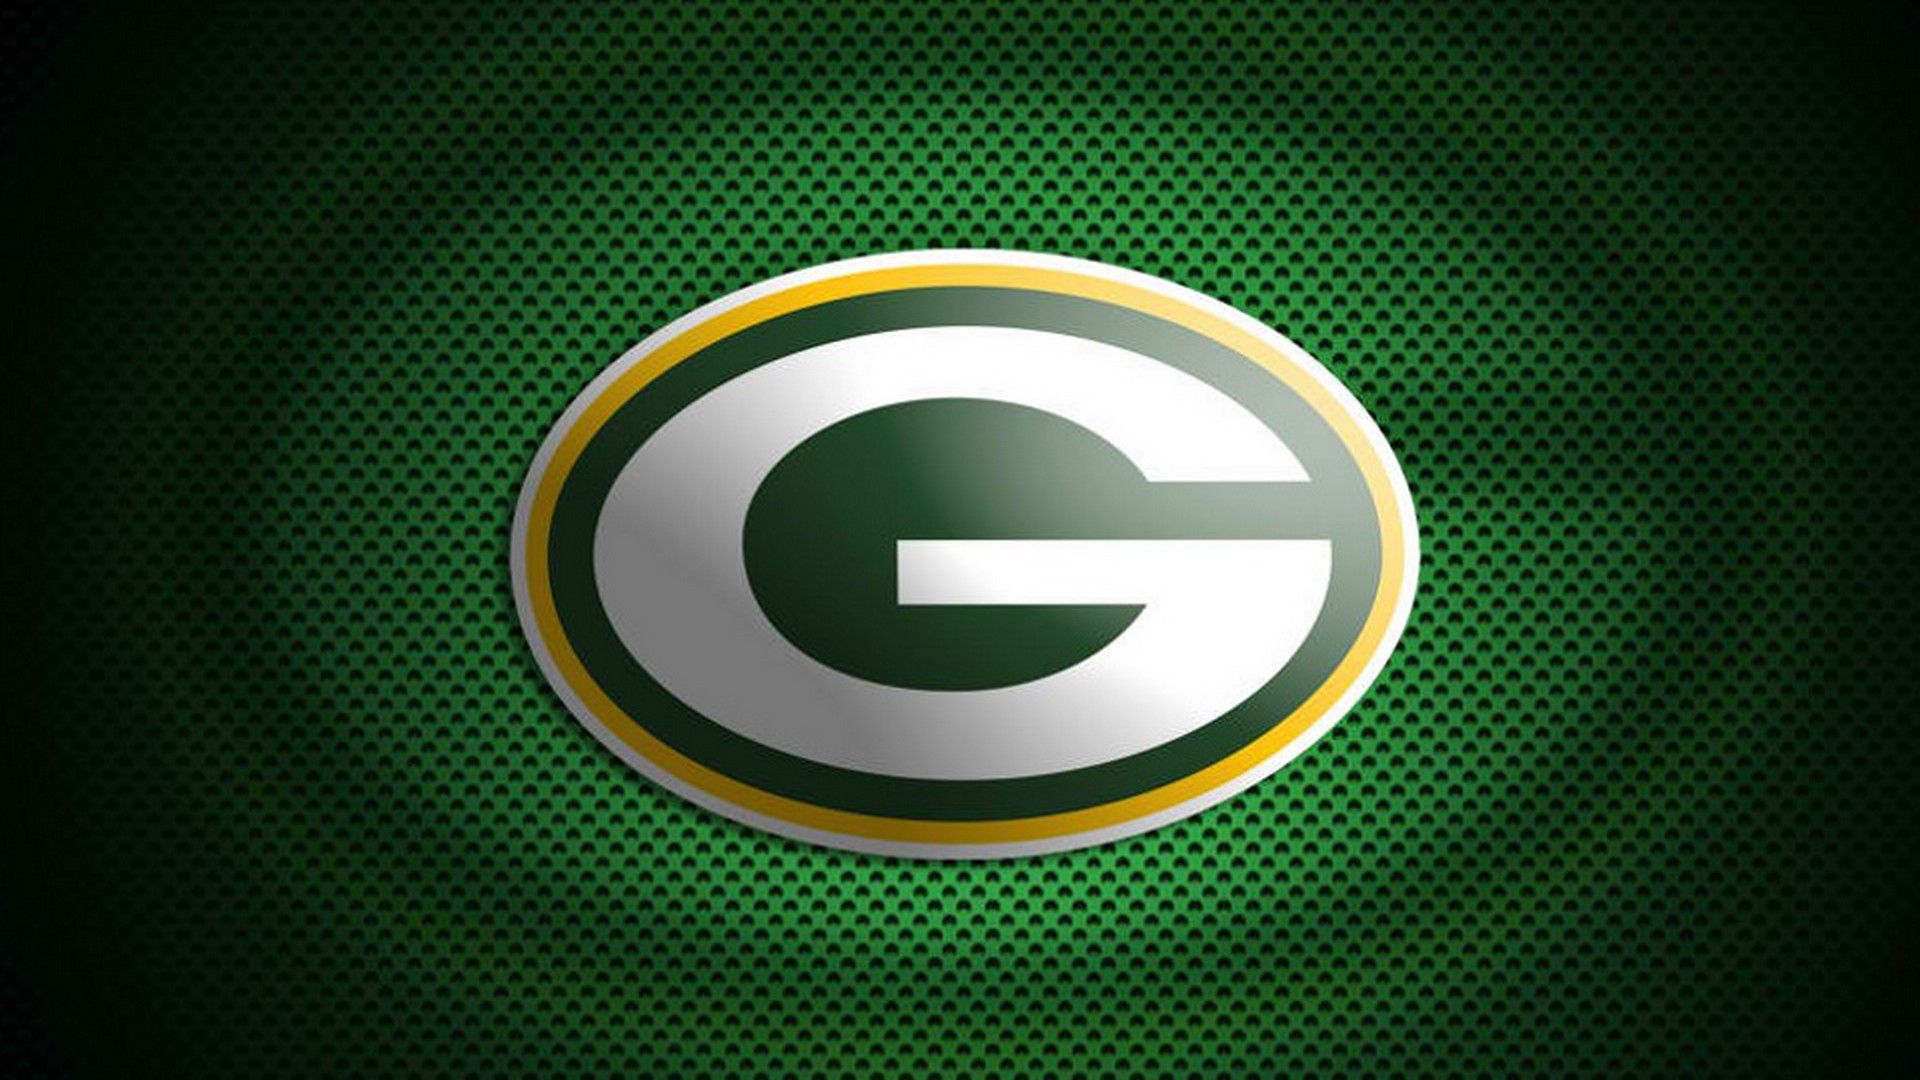 Green Bay Packers For PC Wallpaper NFL Football Wallpaper